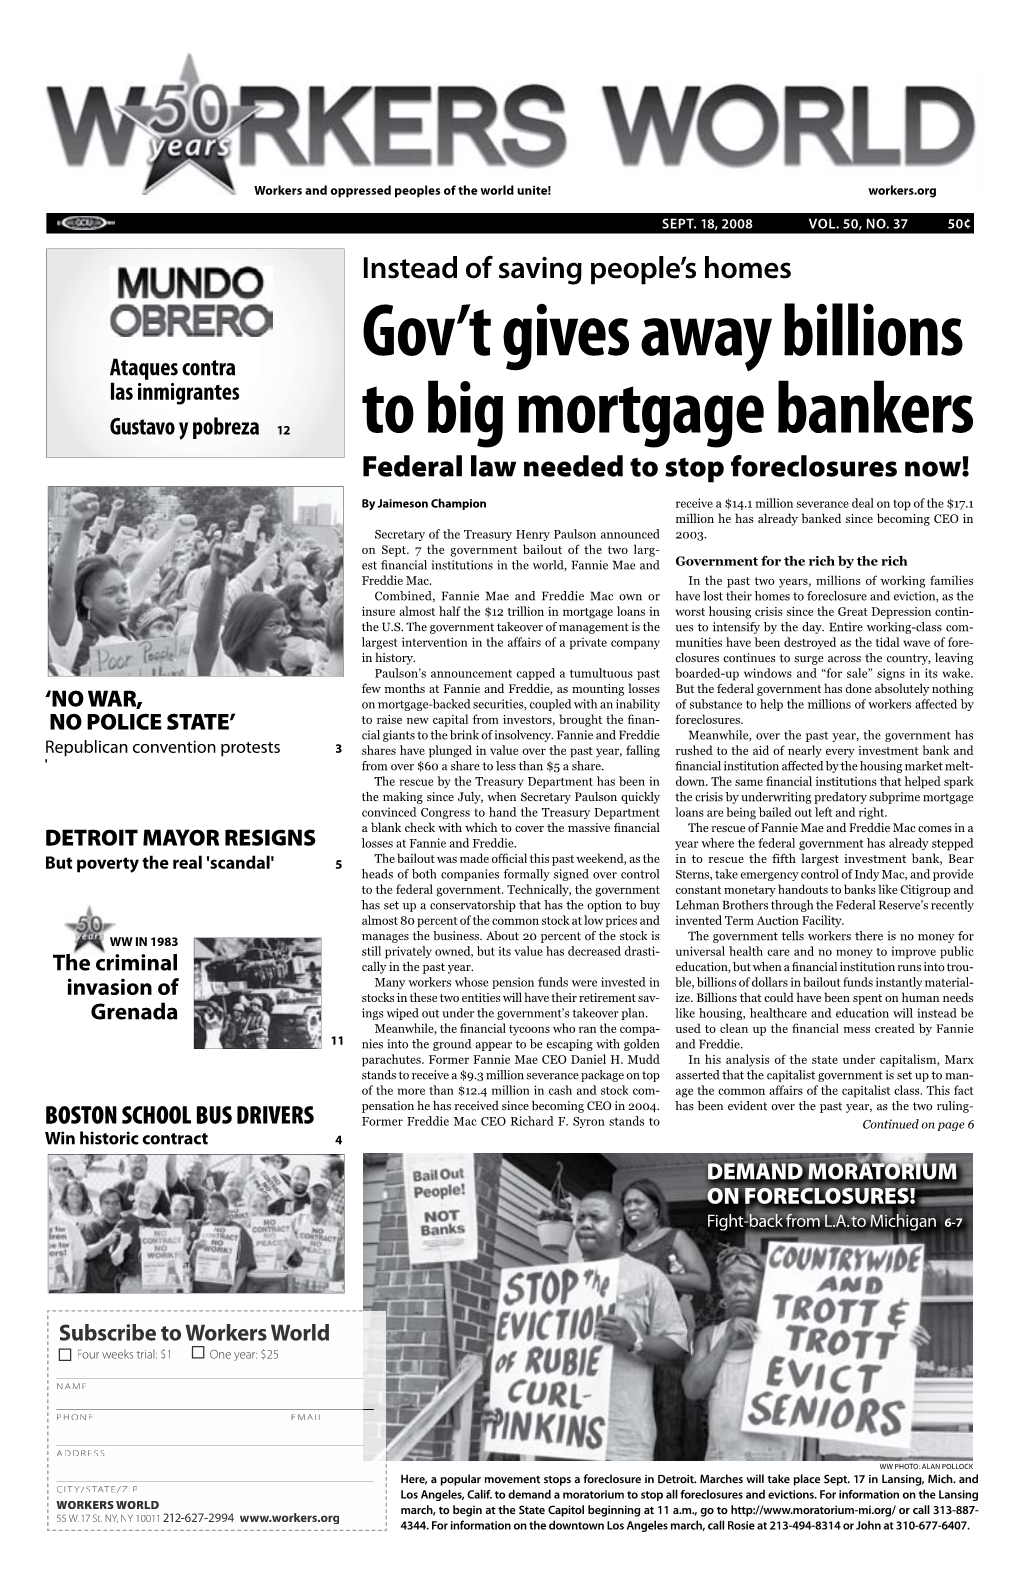 Gov't Gives Away Billions to Big Mortgage Bankers